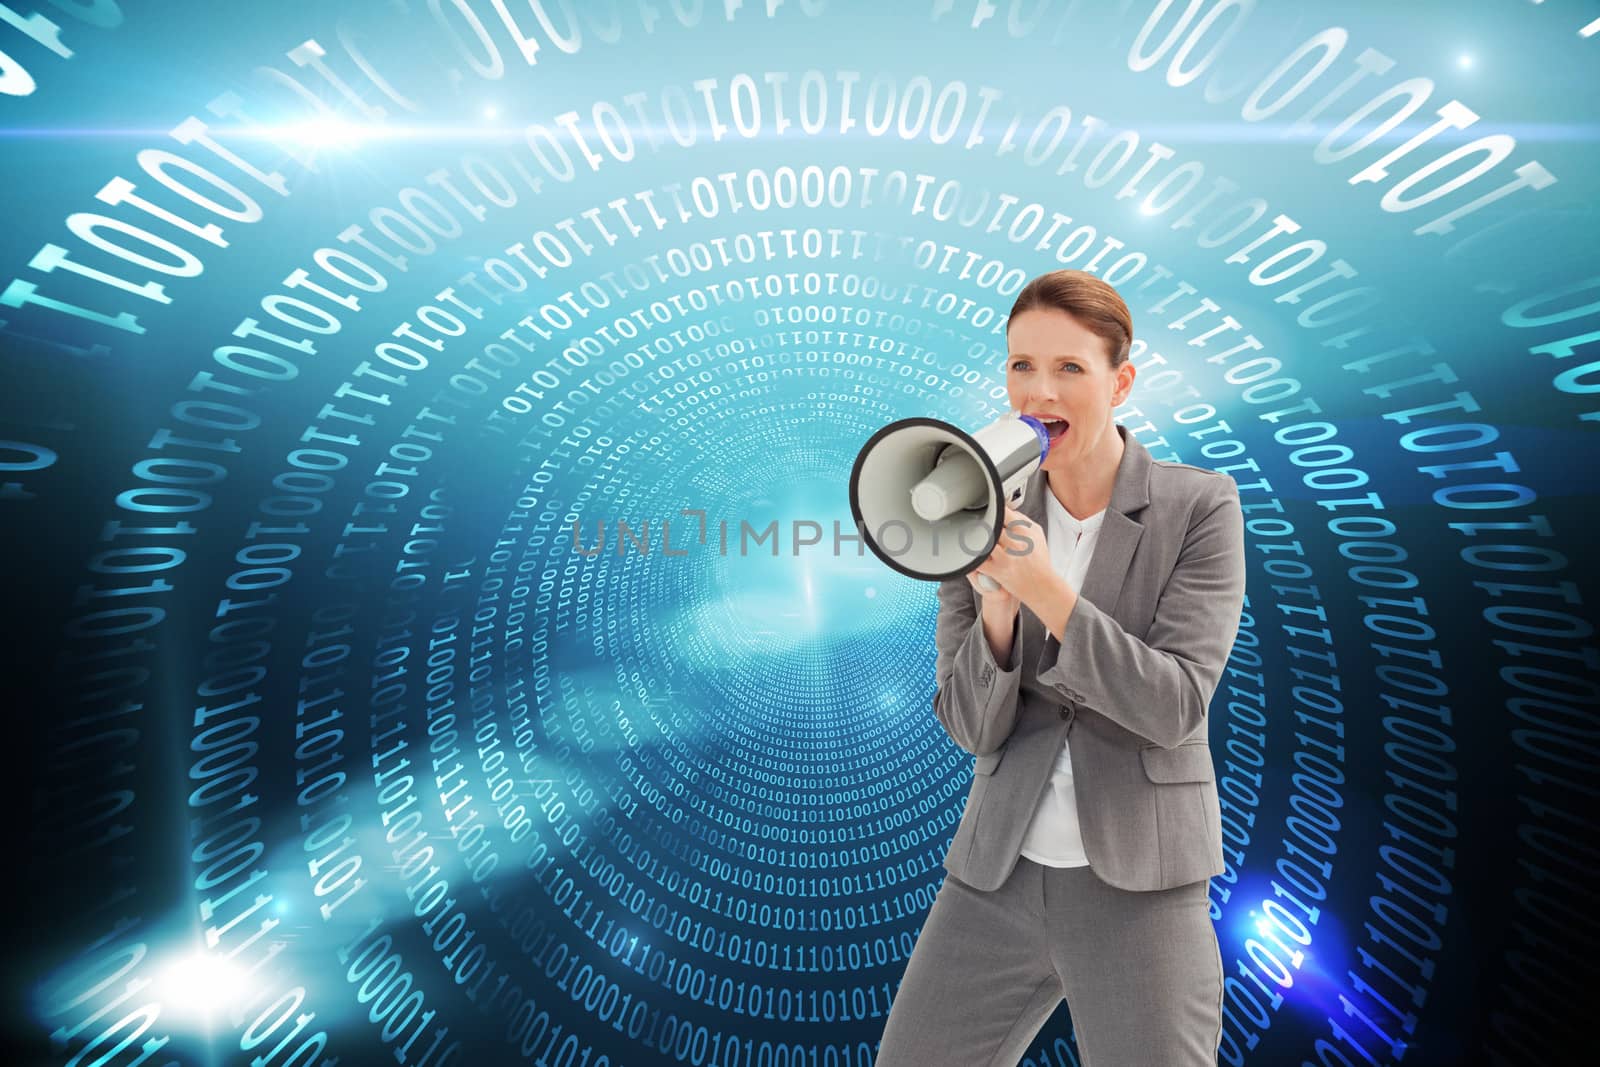 Composite image of businesswoman talking on a megaphone by Wavebreakmedia